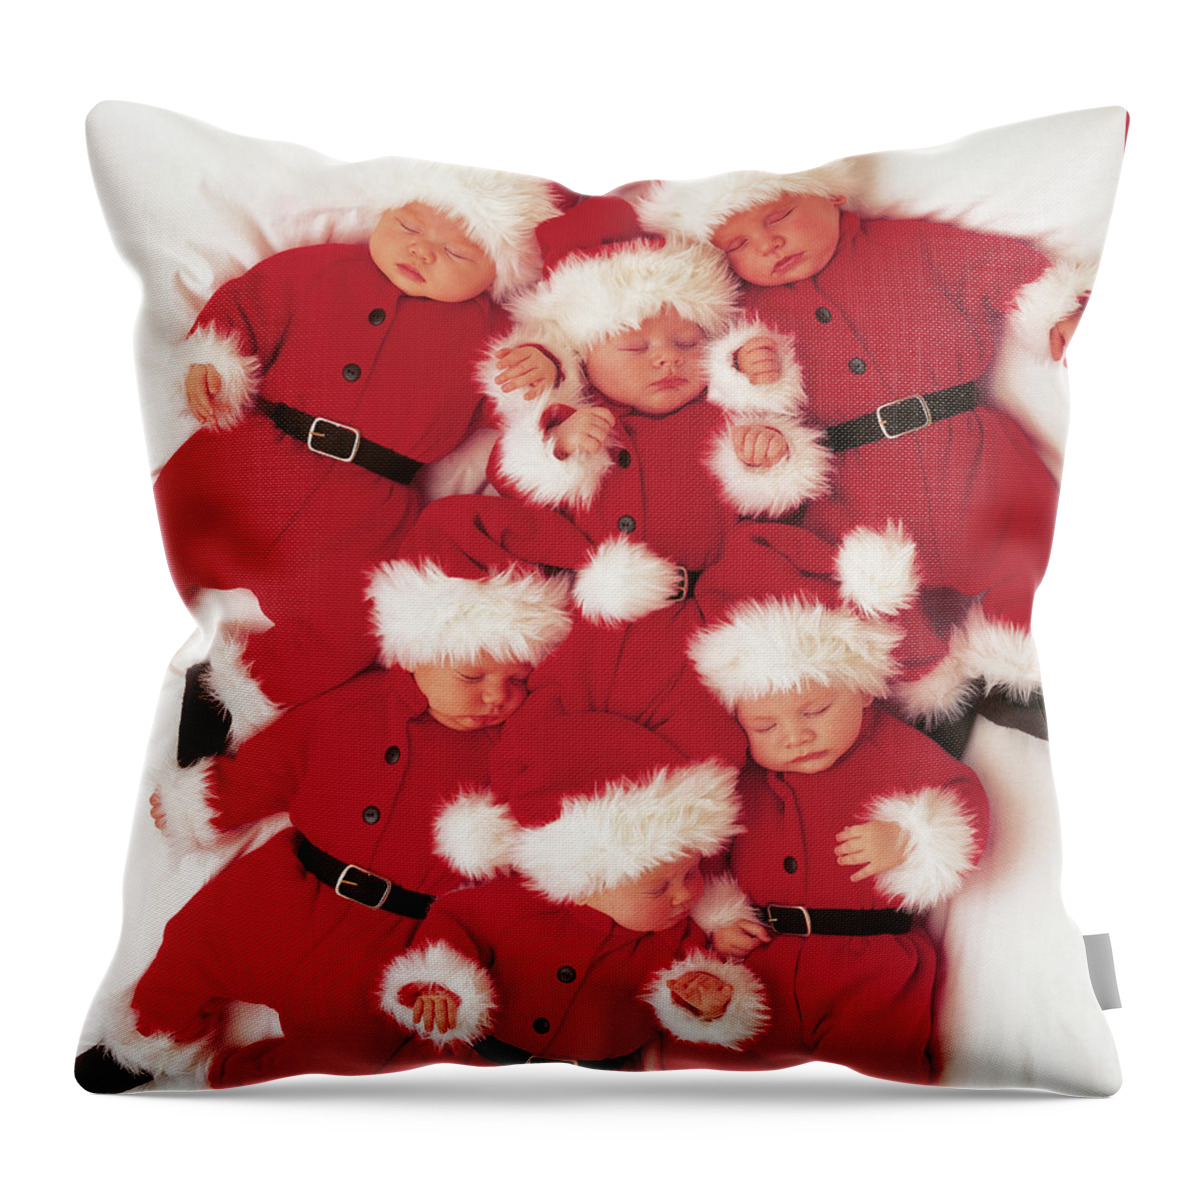 Holiday Throw Pillow featuring the photograph Sleepy Santas by Anne Geddes